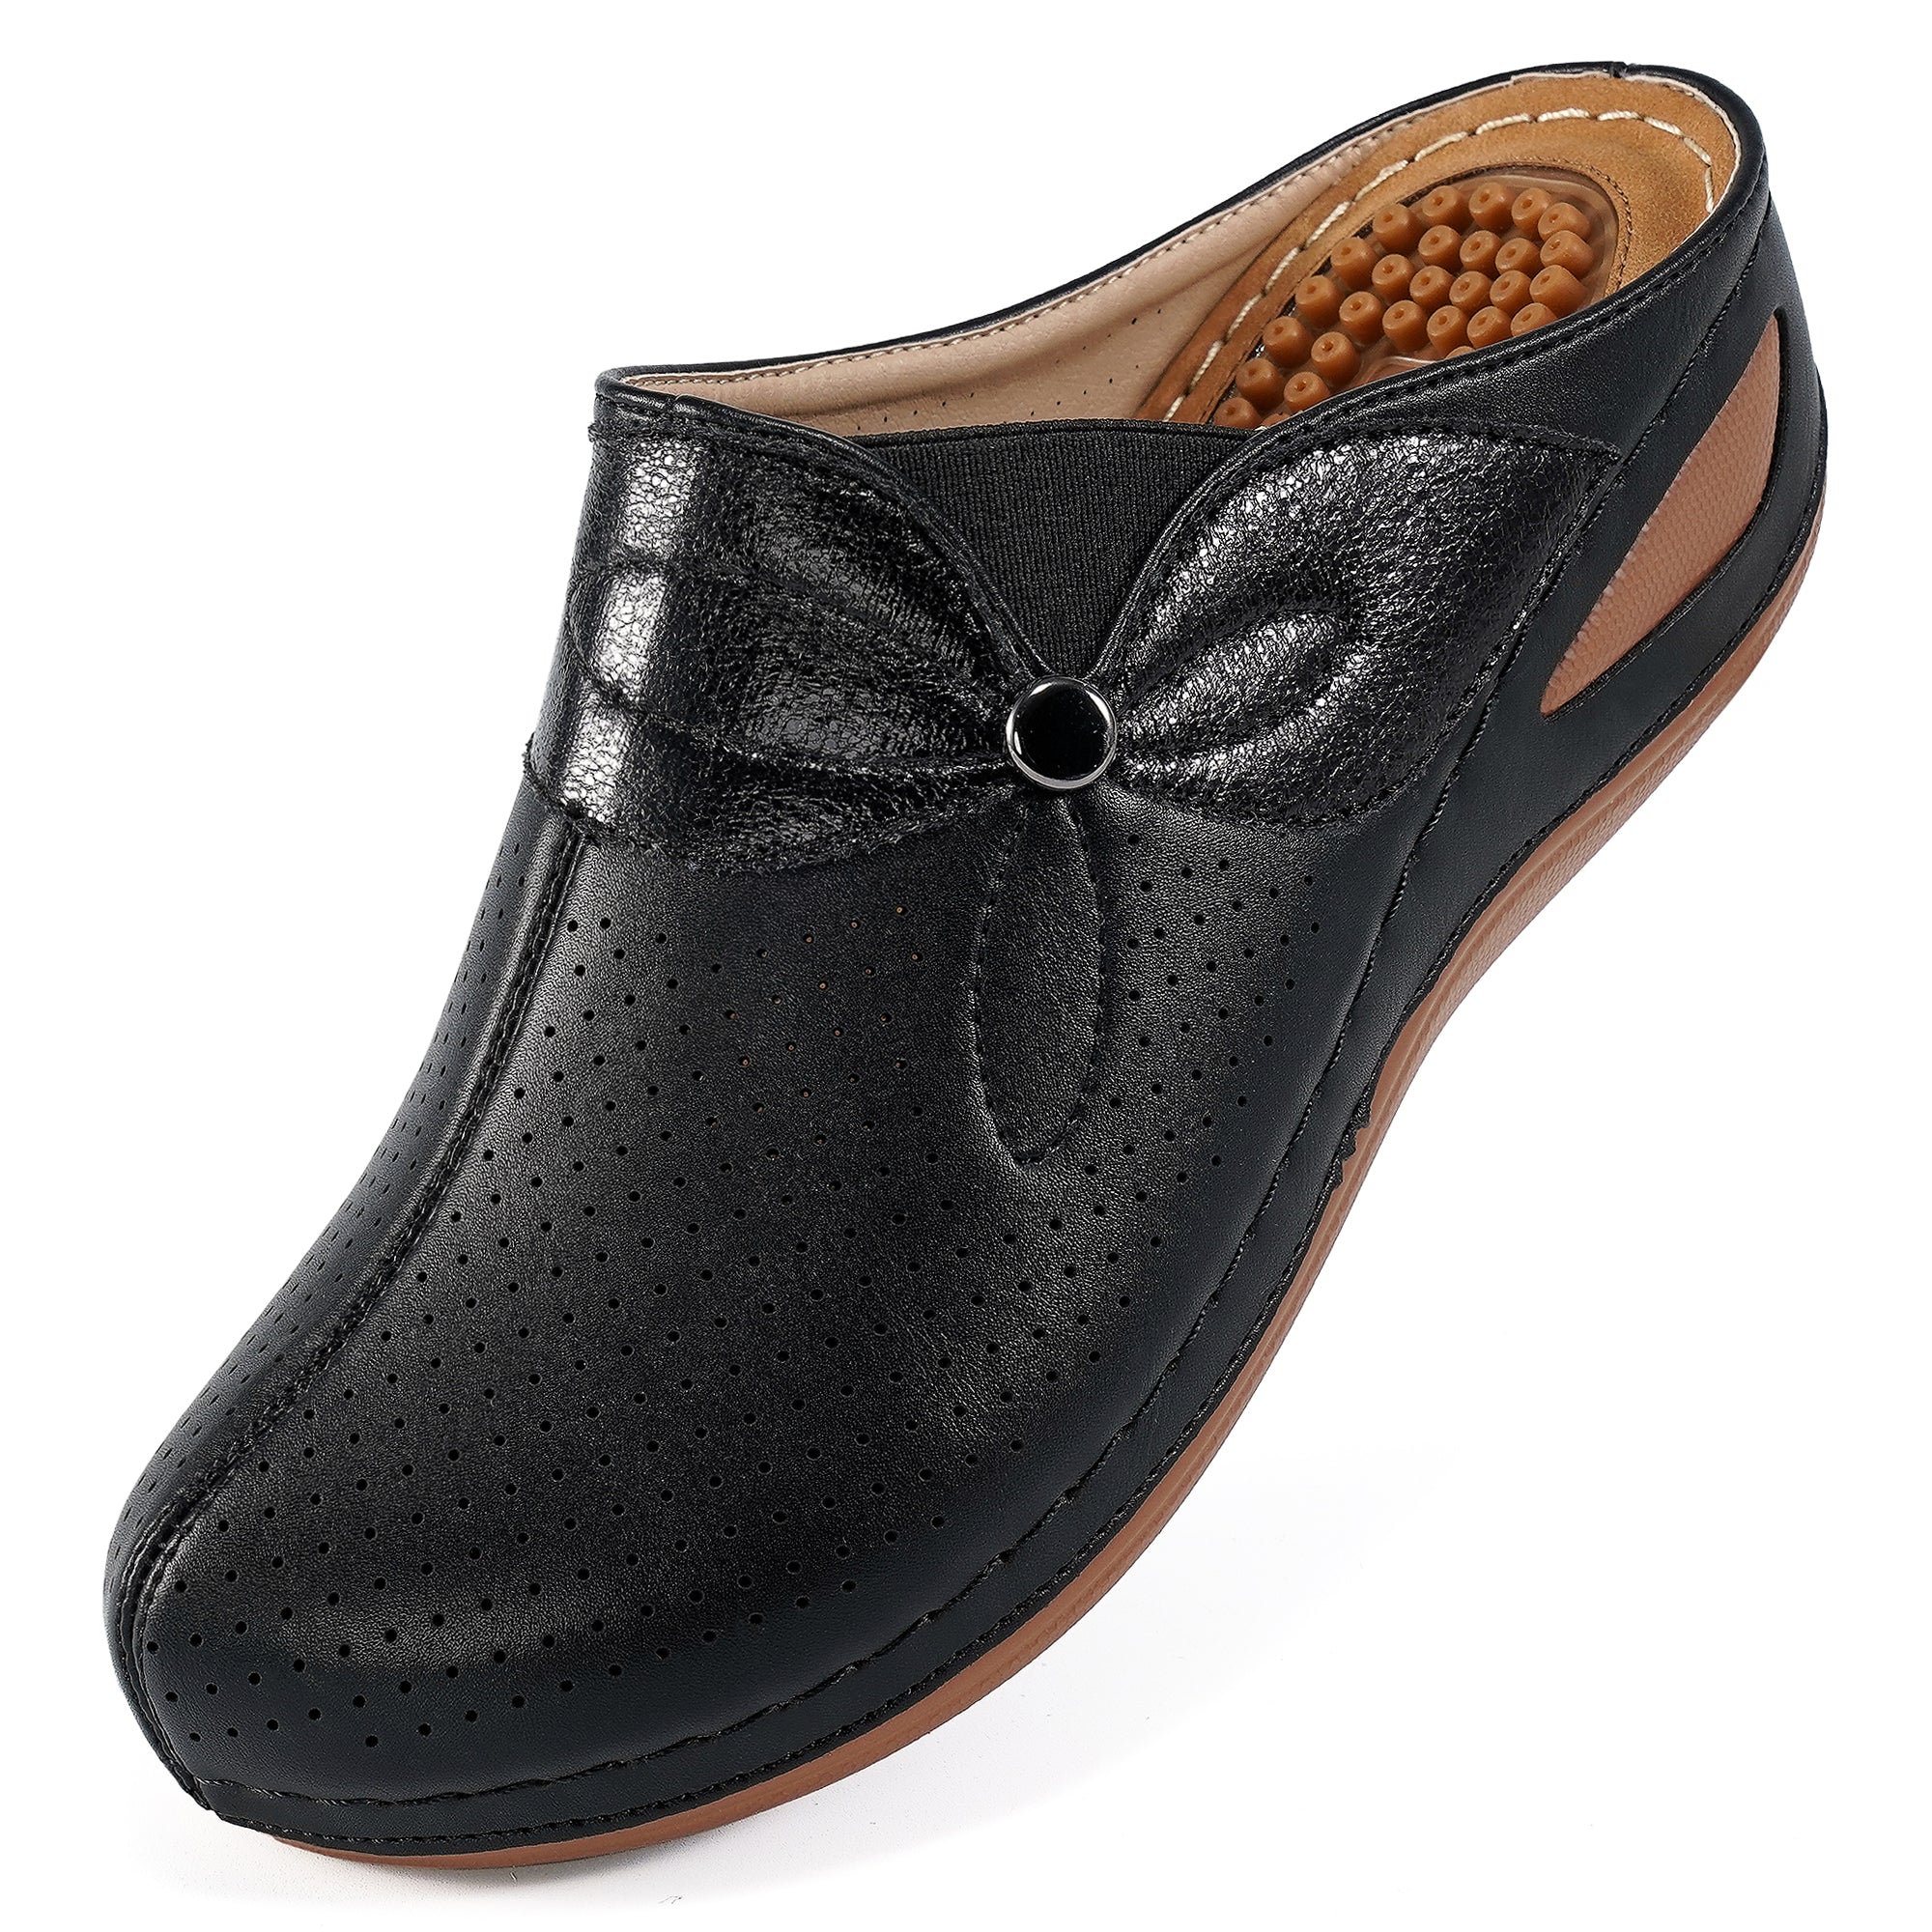 women’s arch support dress shoes